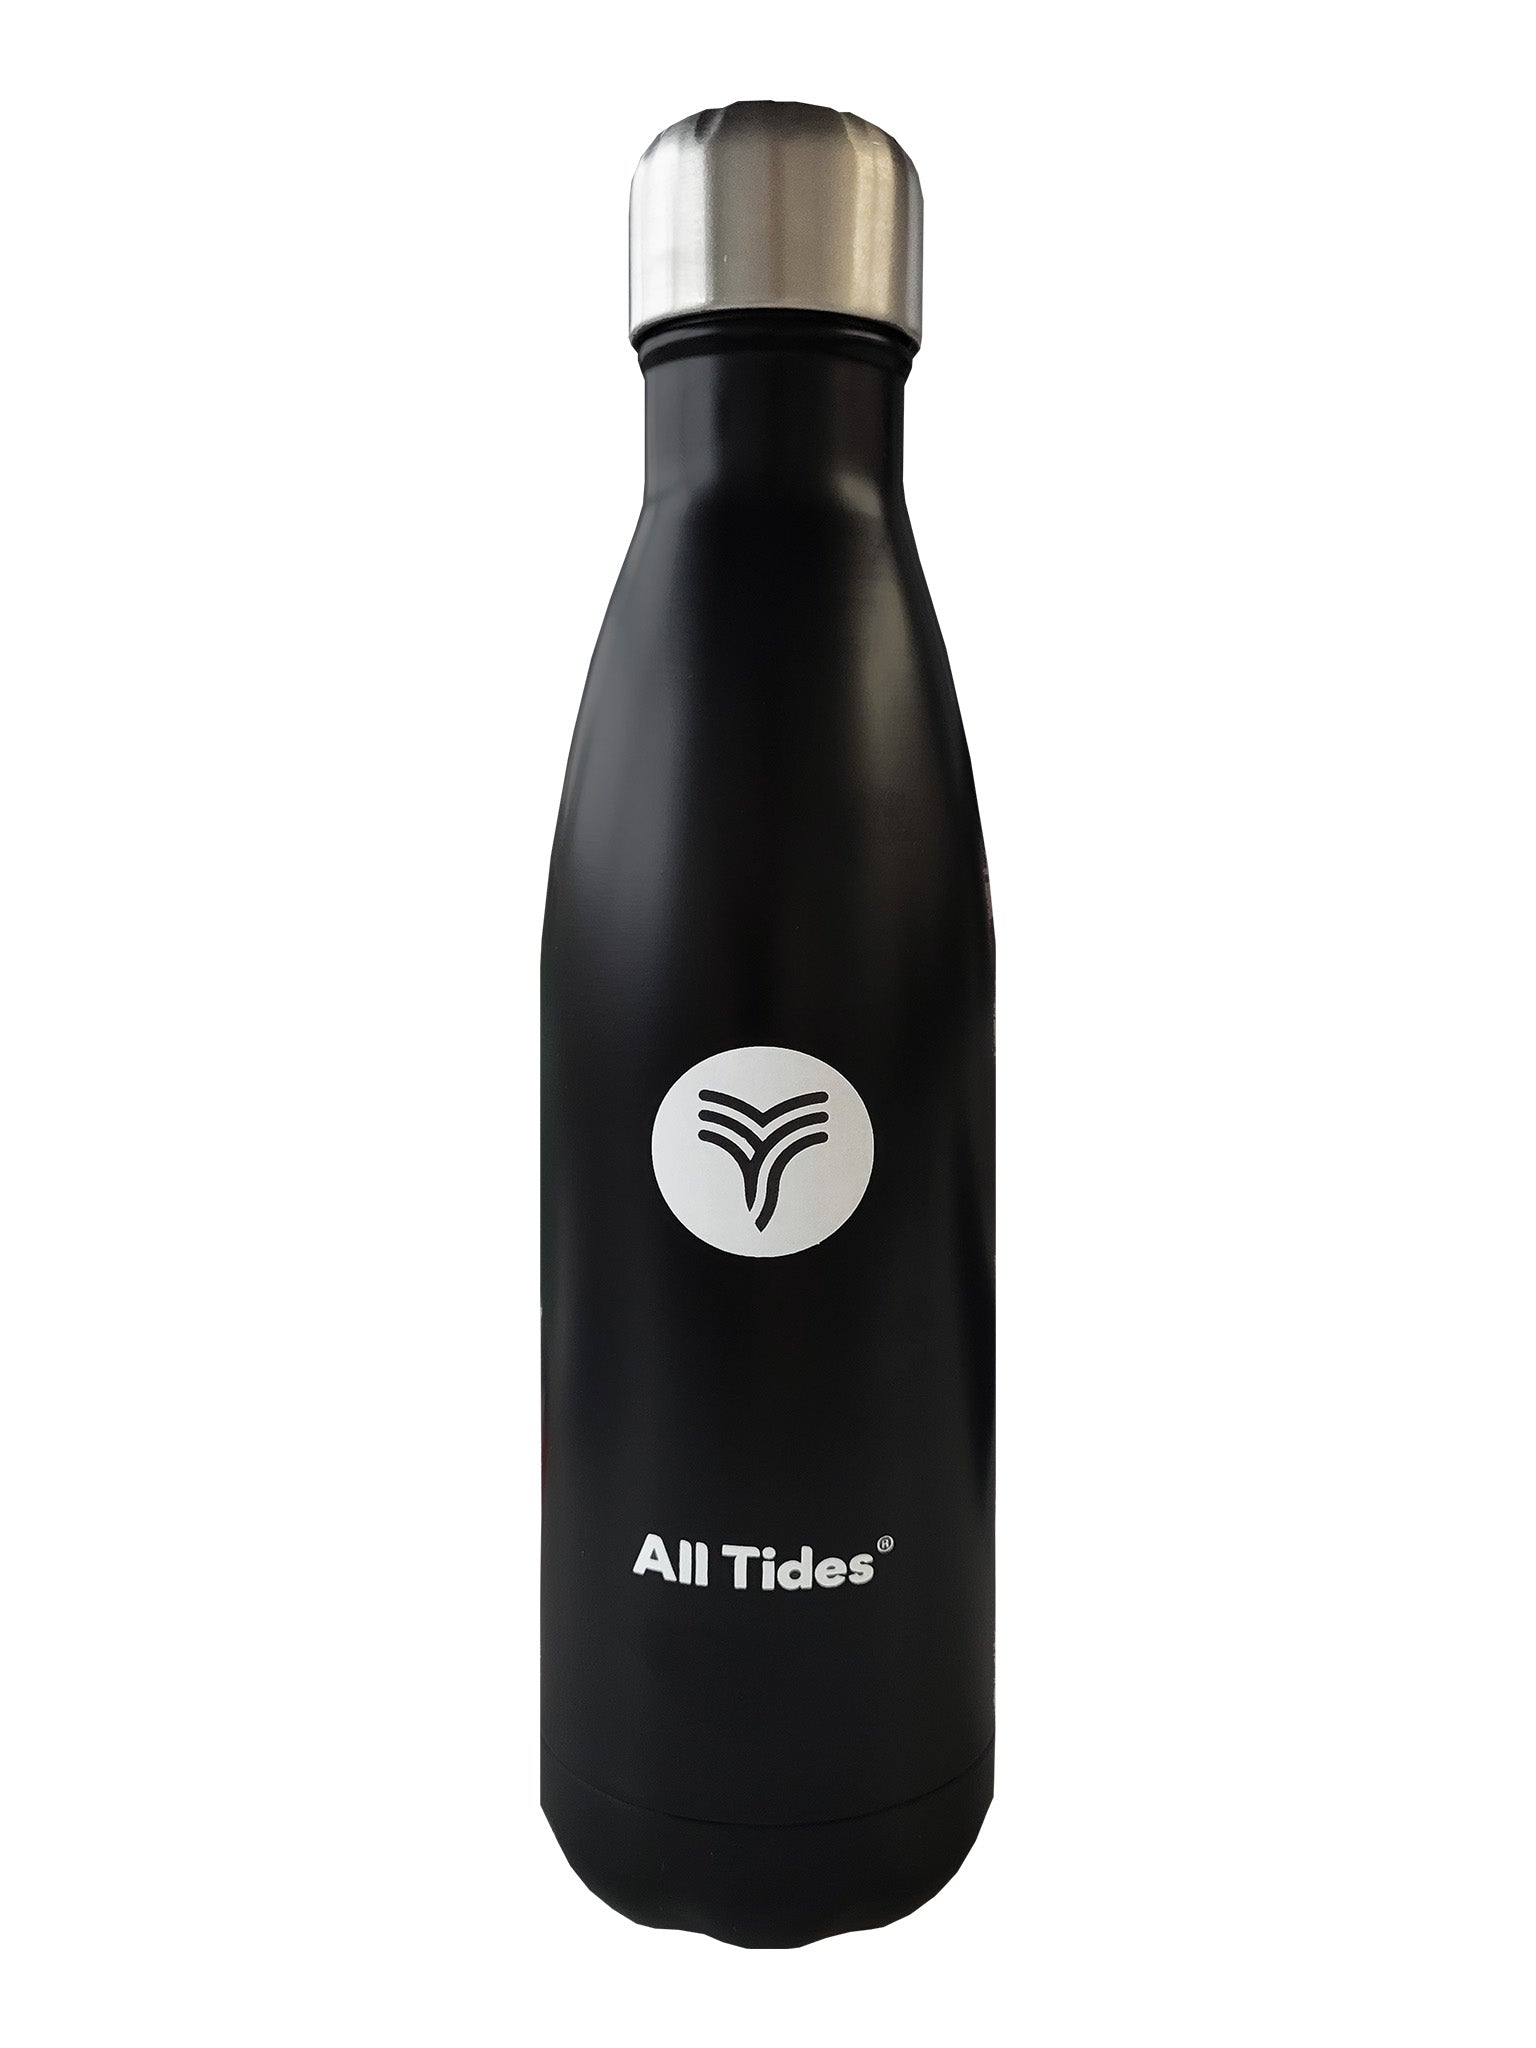 All Tides Stainless Steel Water Bottle - Black